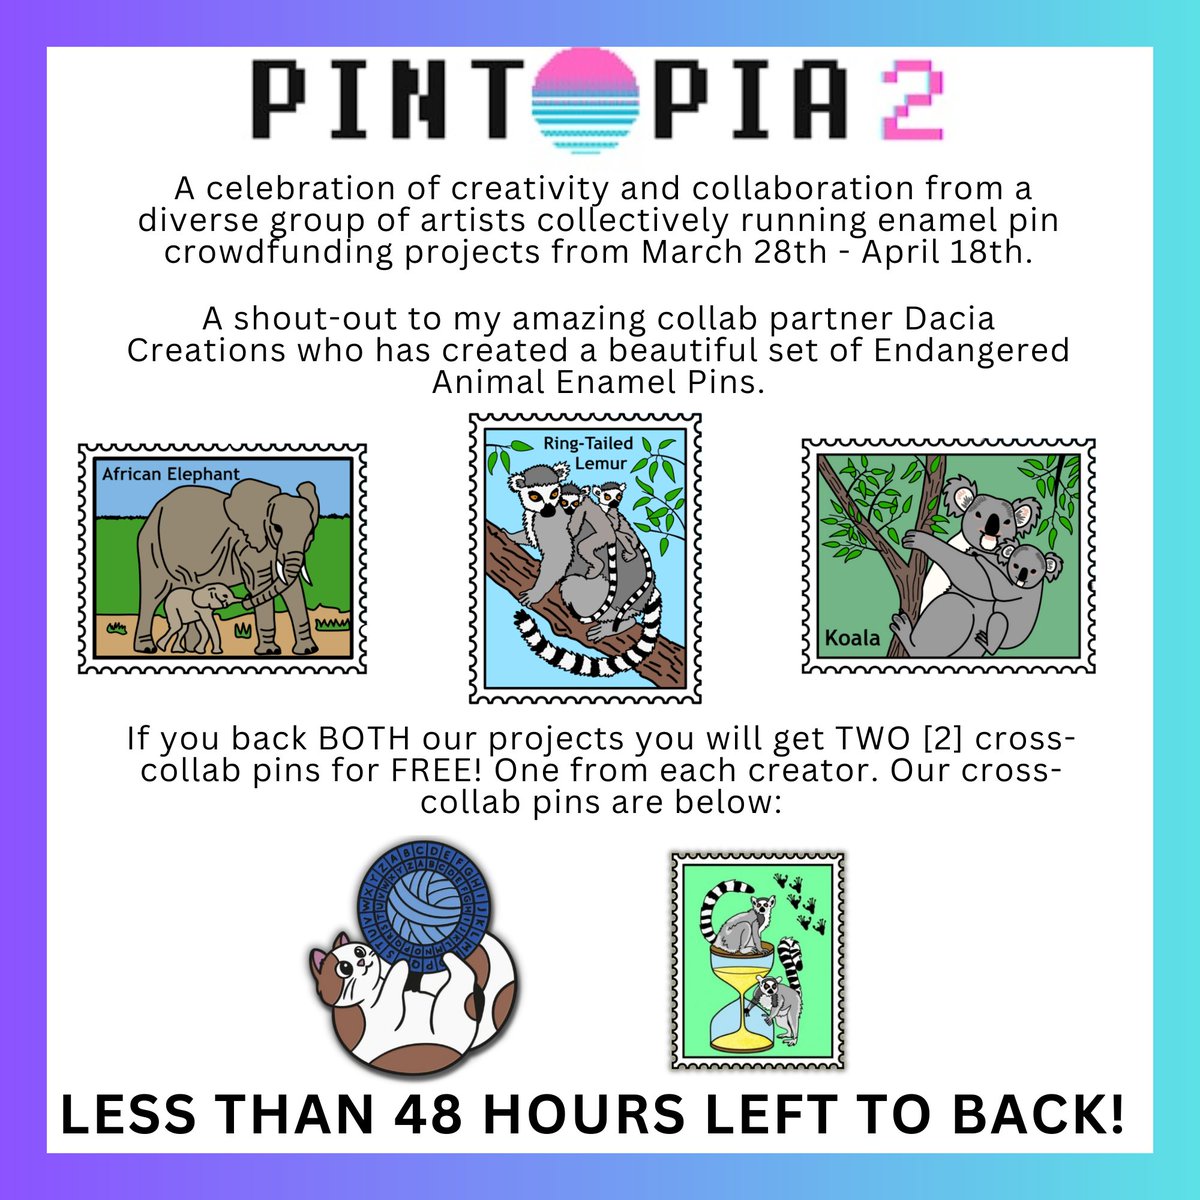 We are fast approaching the final 24 hours of Pintopia 2!

Link to my collab partner -

backerkit.com/c/projects/dac…

#lastchance #linkinbio #pintopia #pintopia2 #pintopia2024 #BackerKit